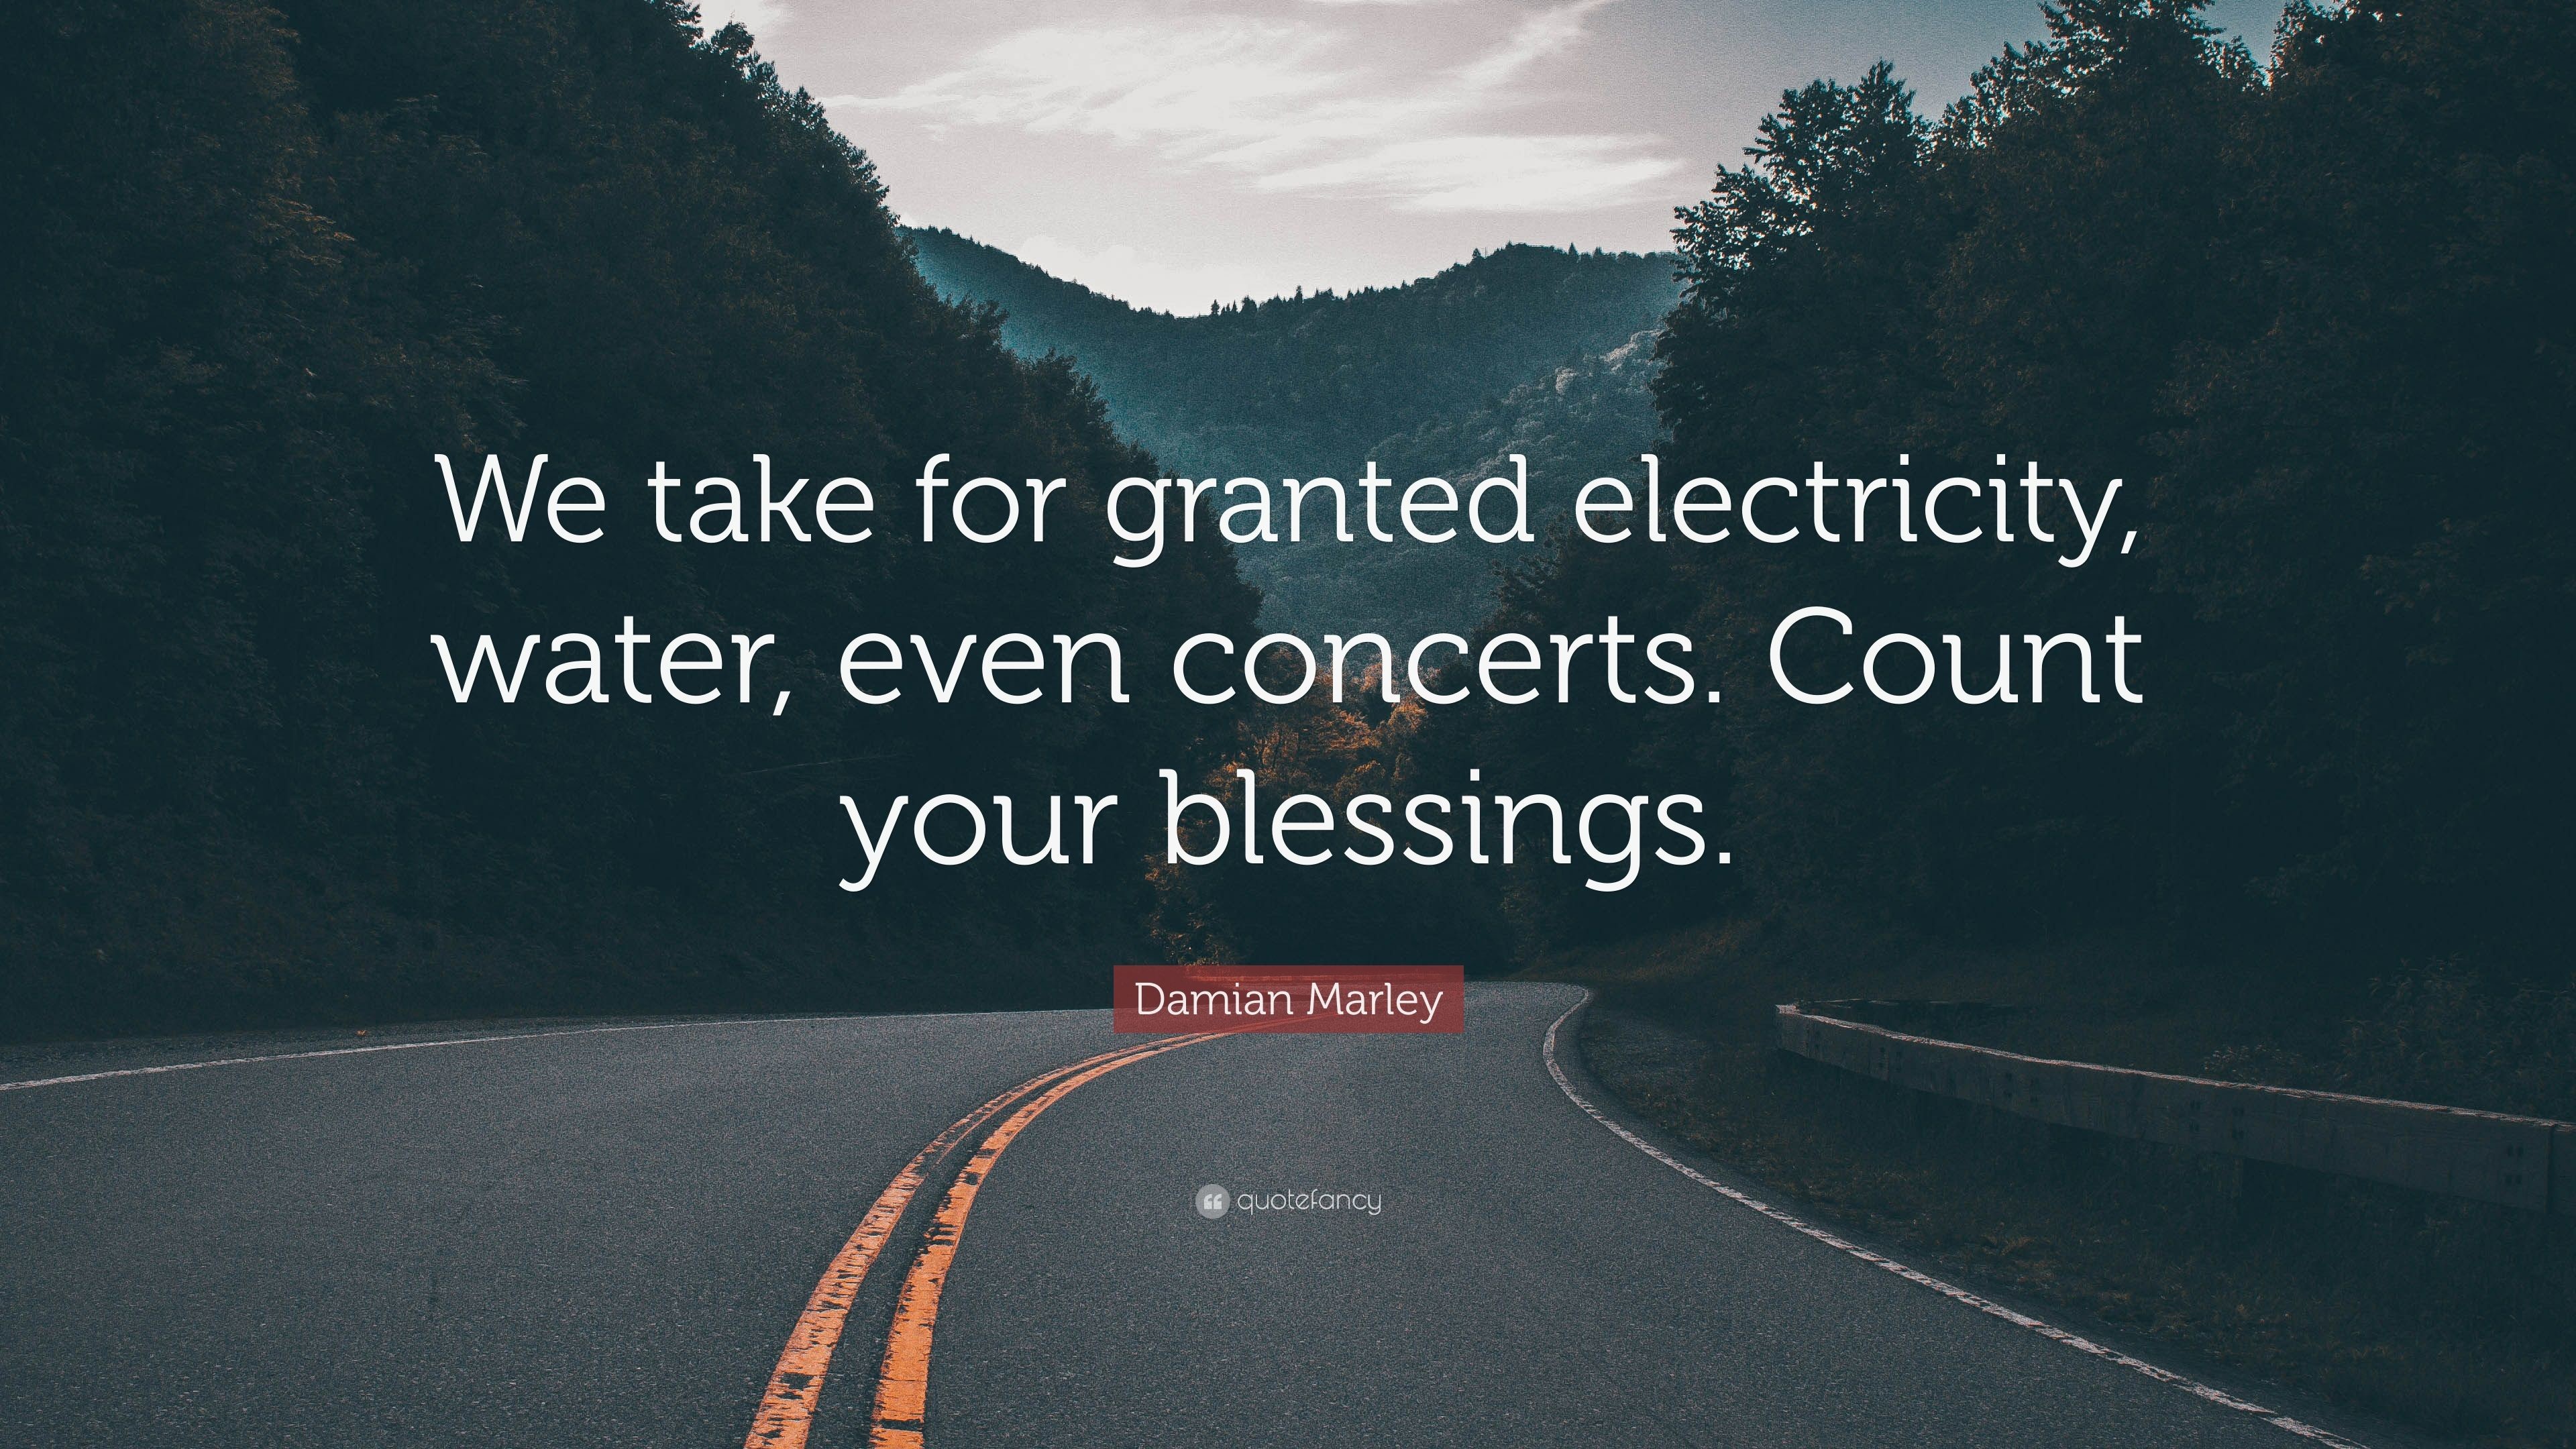 3840x2160 Damian Marley Quote: “We take for granted electricity, water, even concerts.